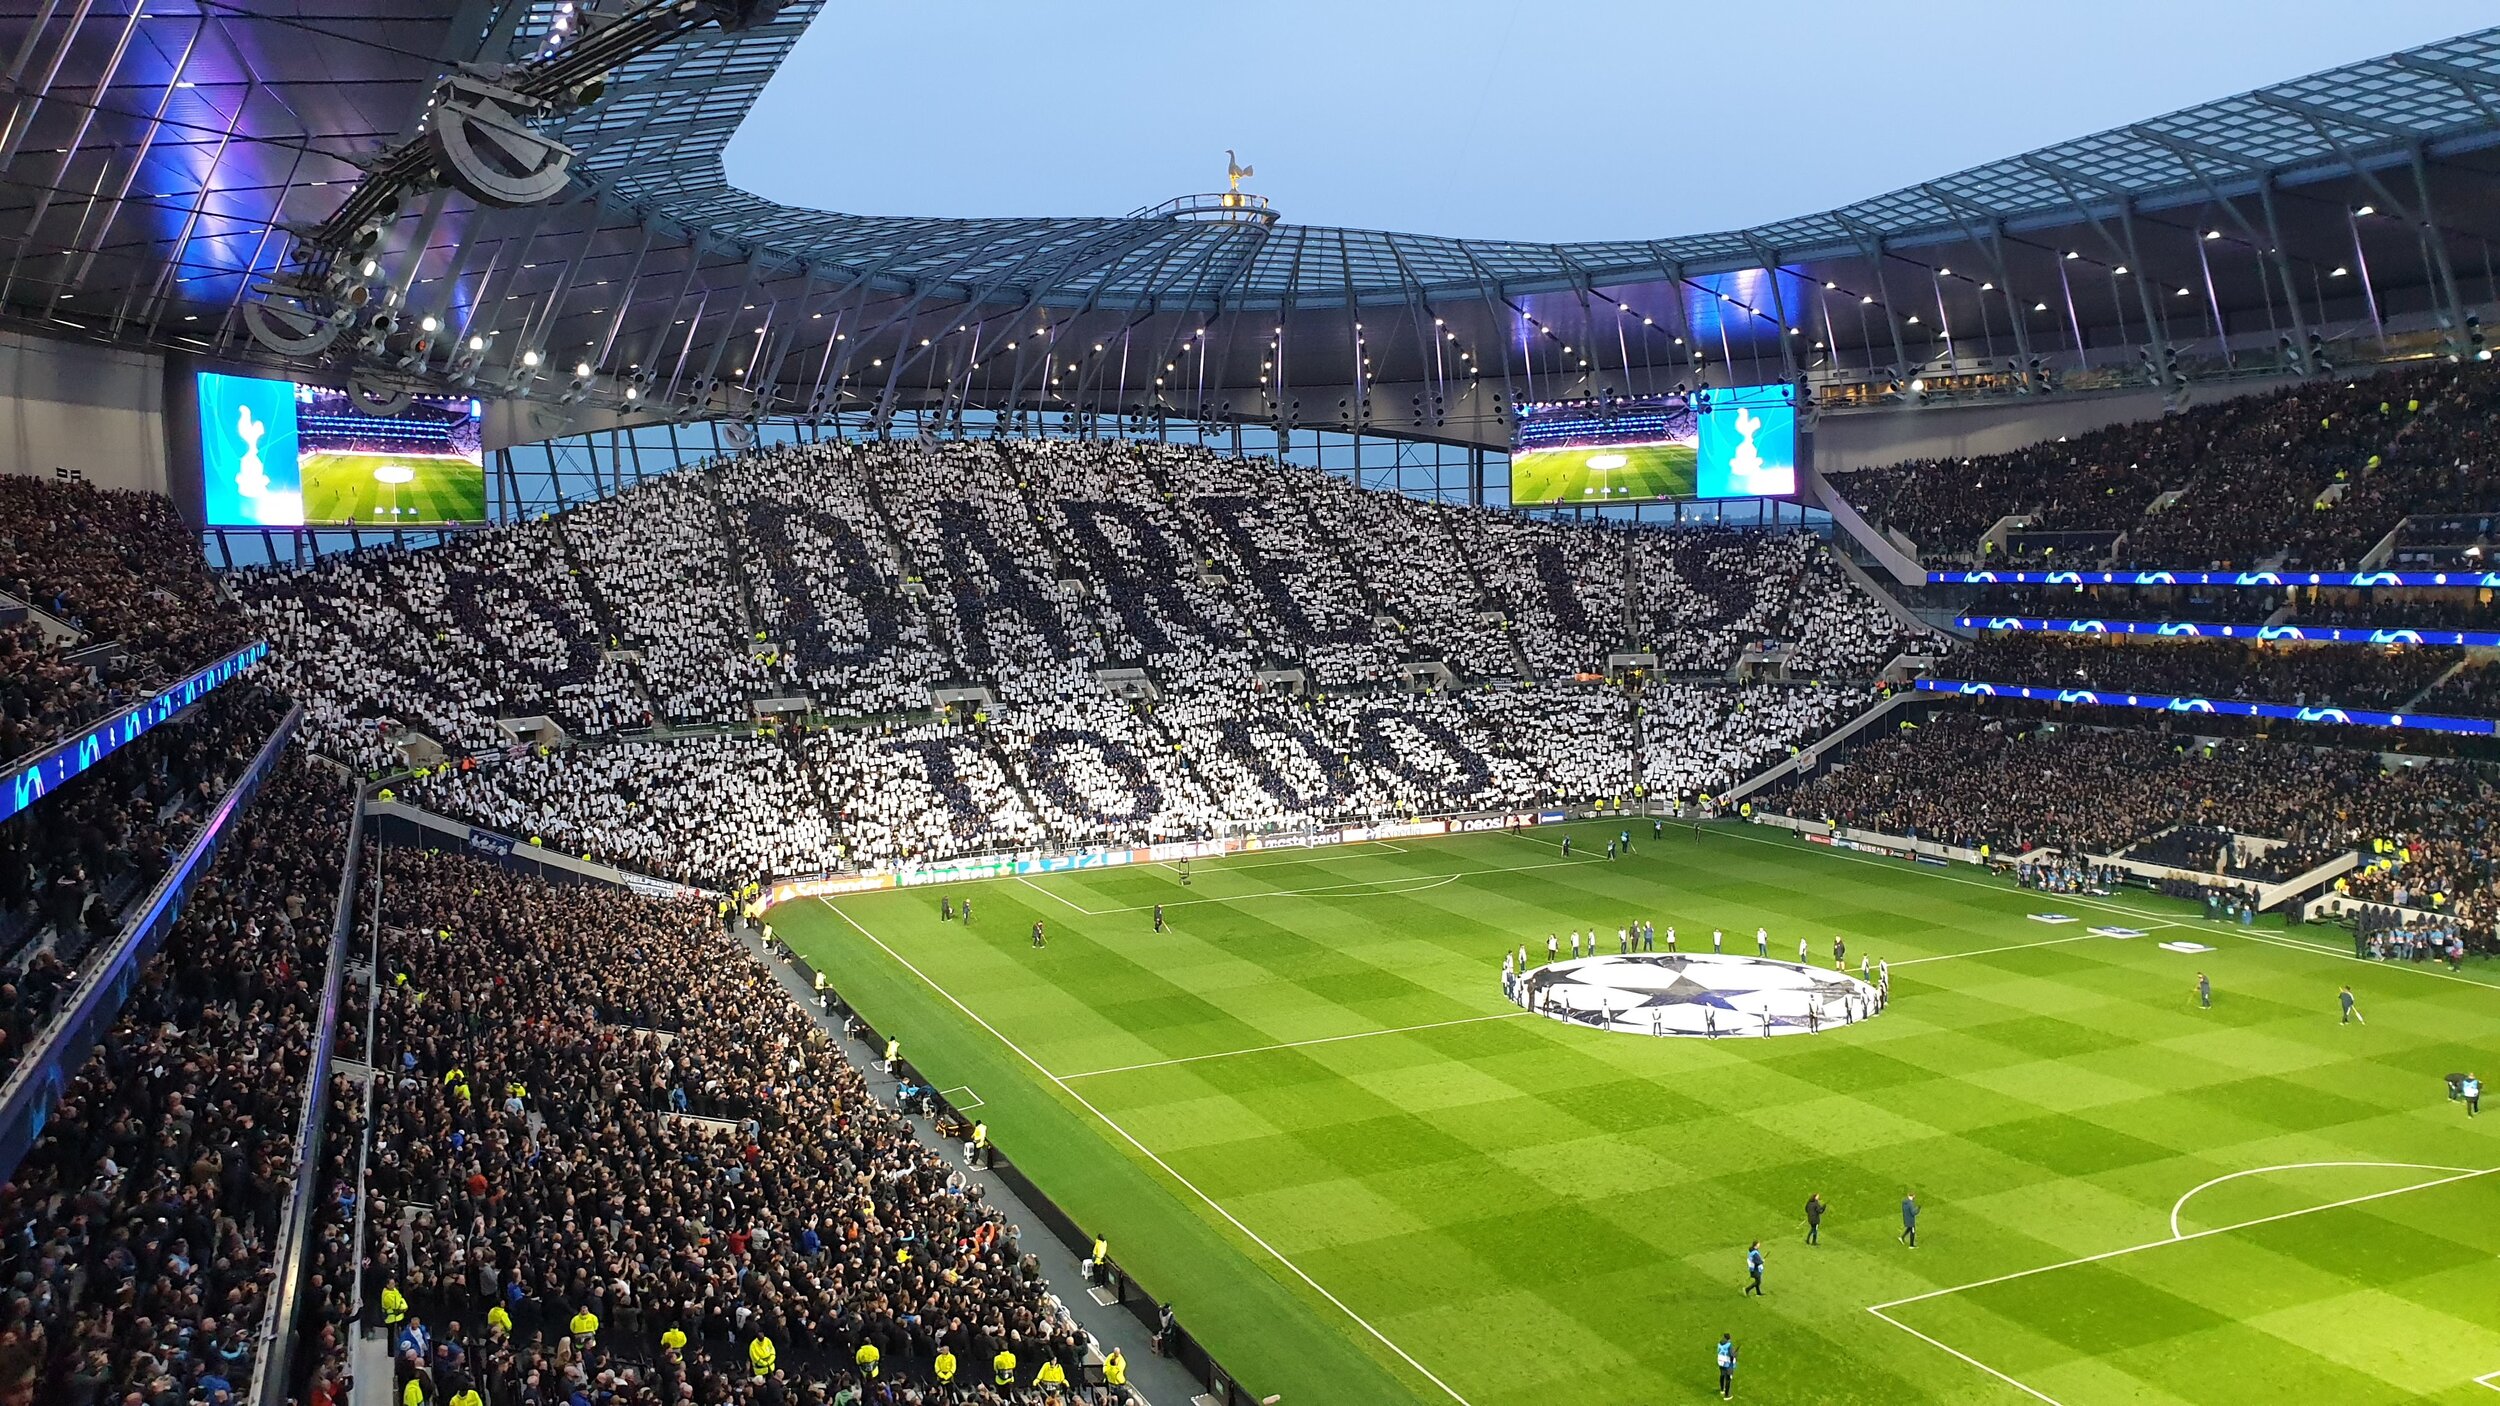 The newest of the 180 stadiums in the UK - The Tottenham Hotspur Stadium